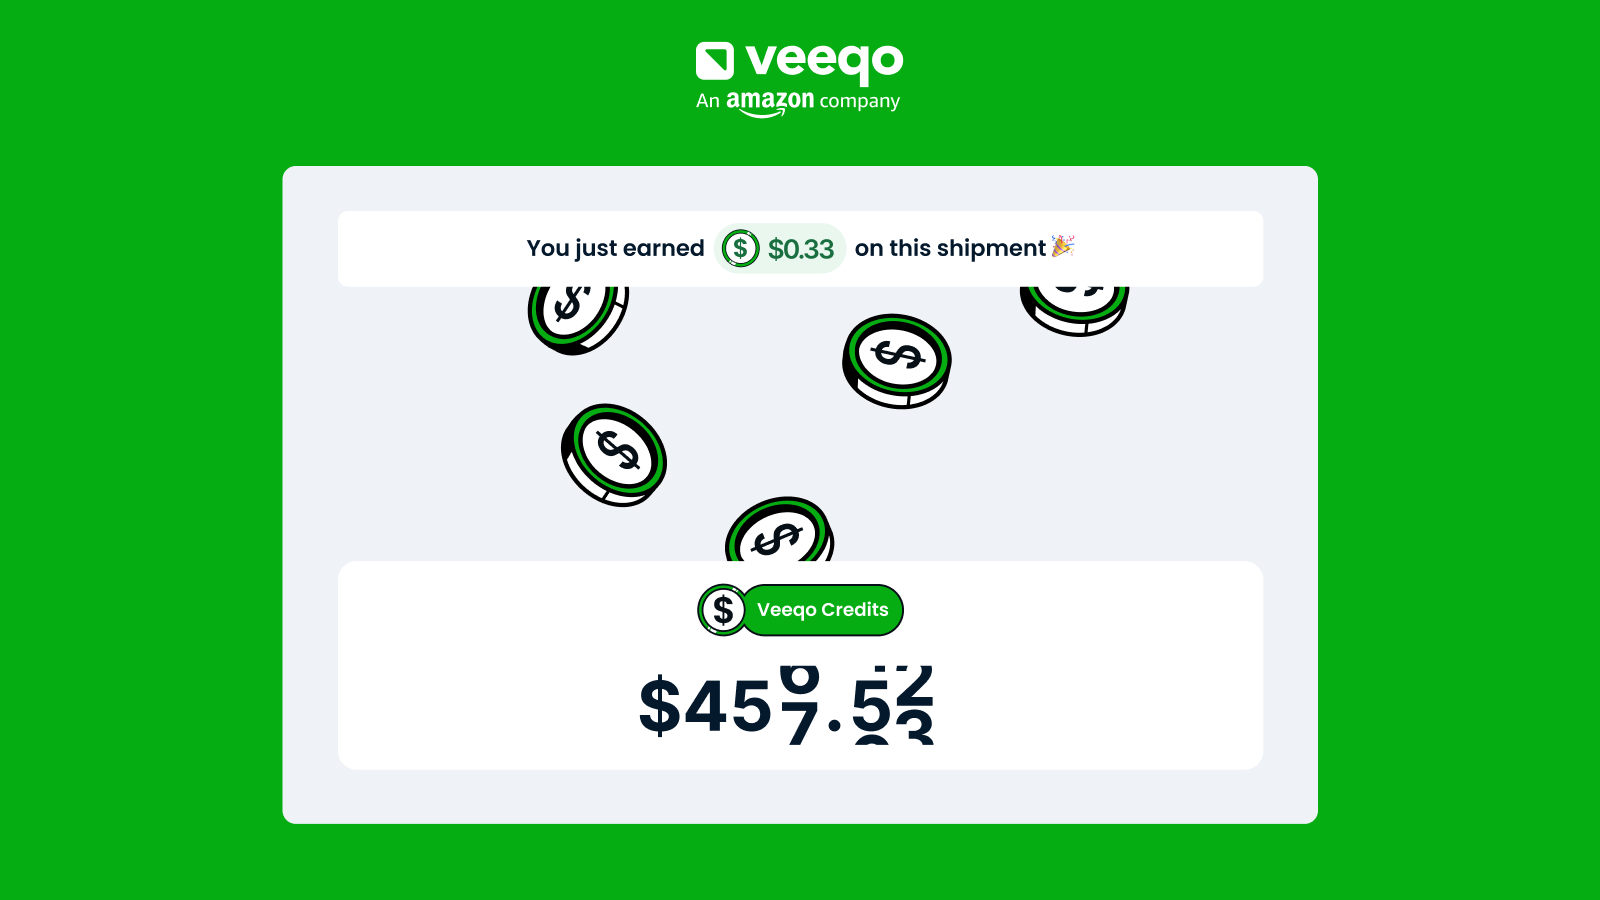 Get up to 5% back in Veeqo Credits (US)